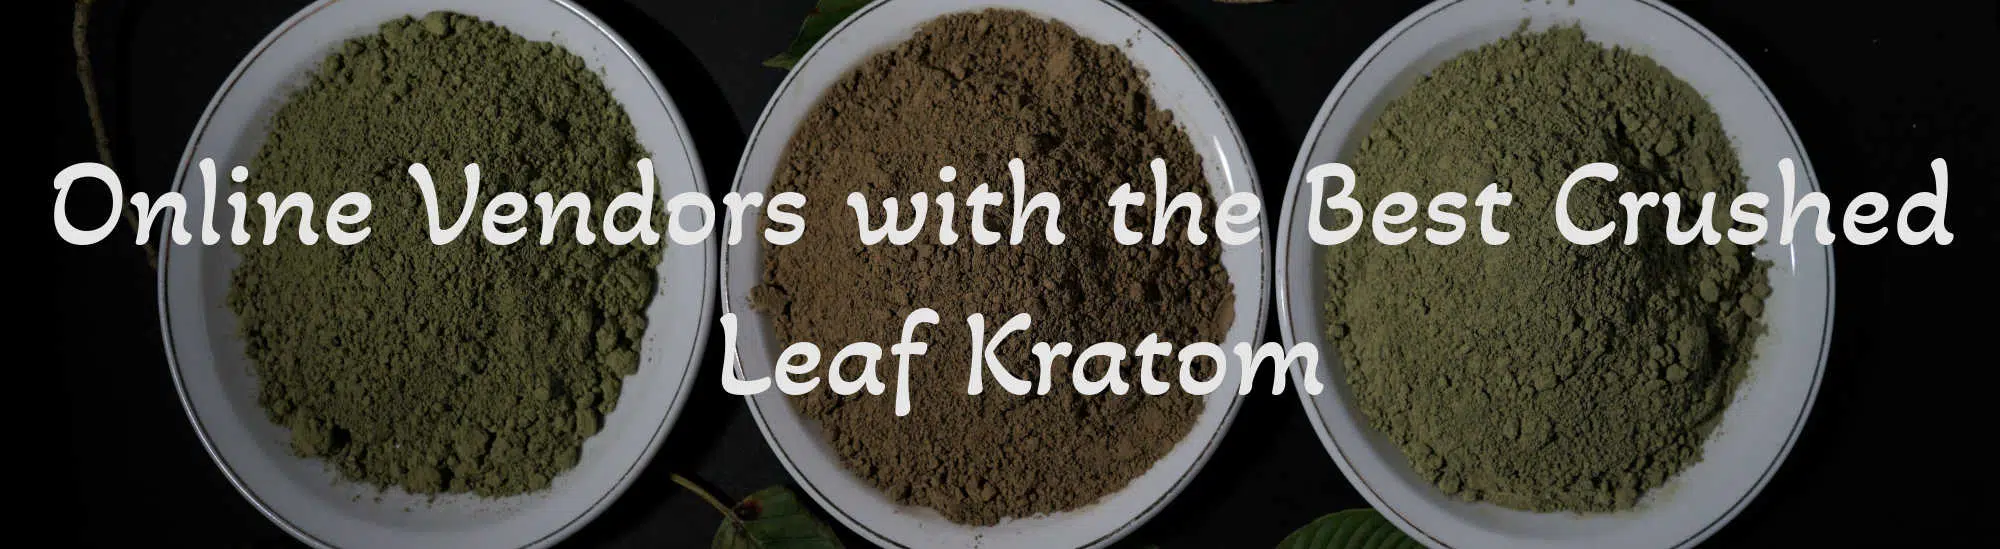 image of online vendors with the best crushed leaf kratom